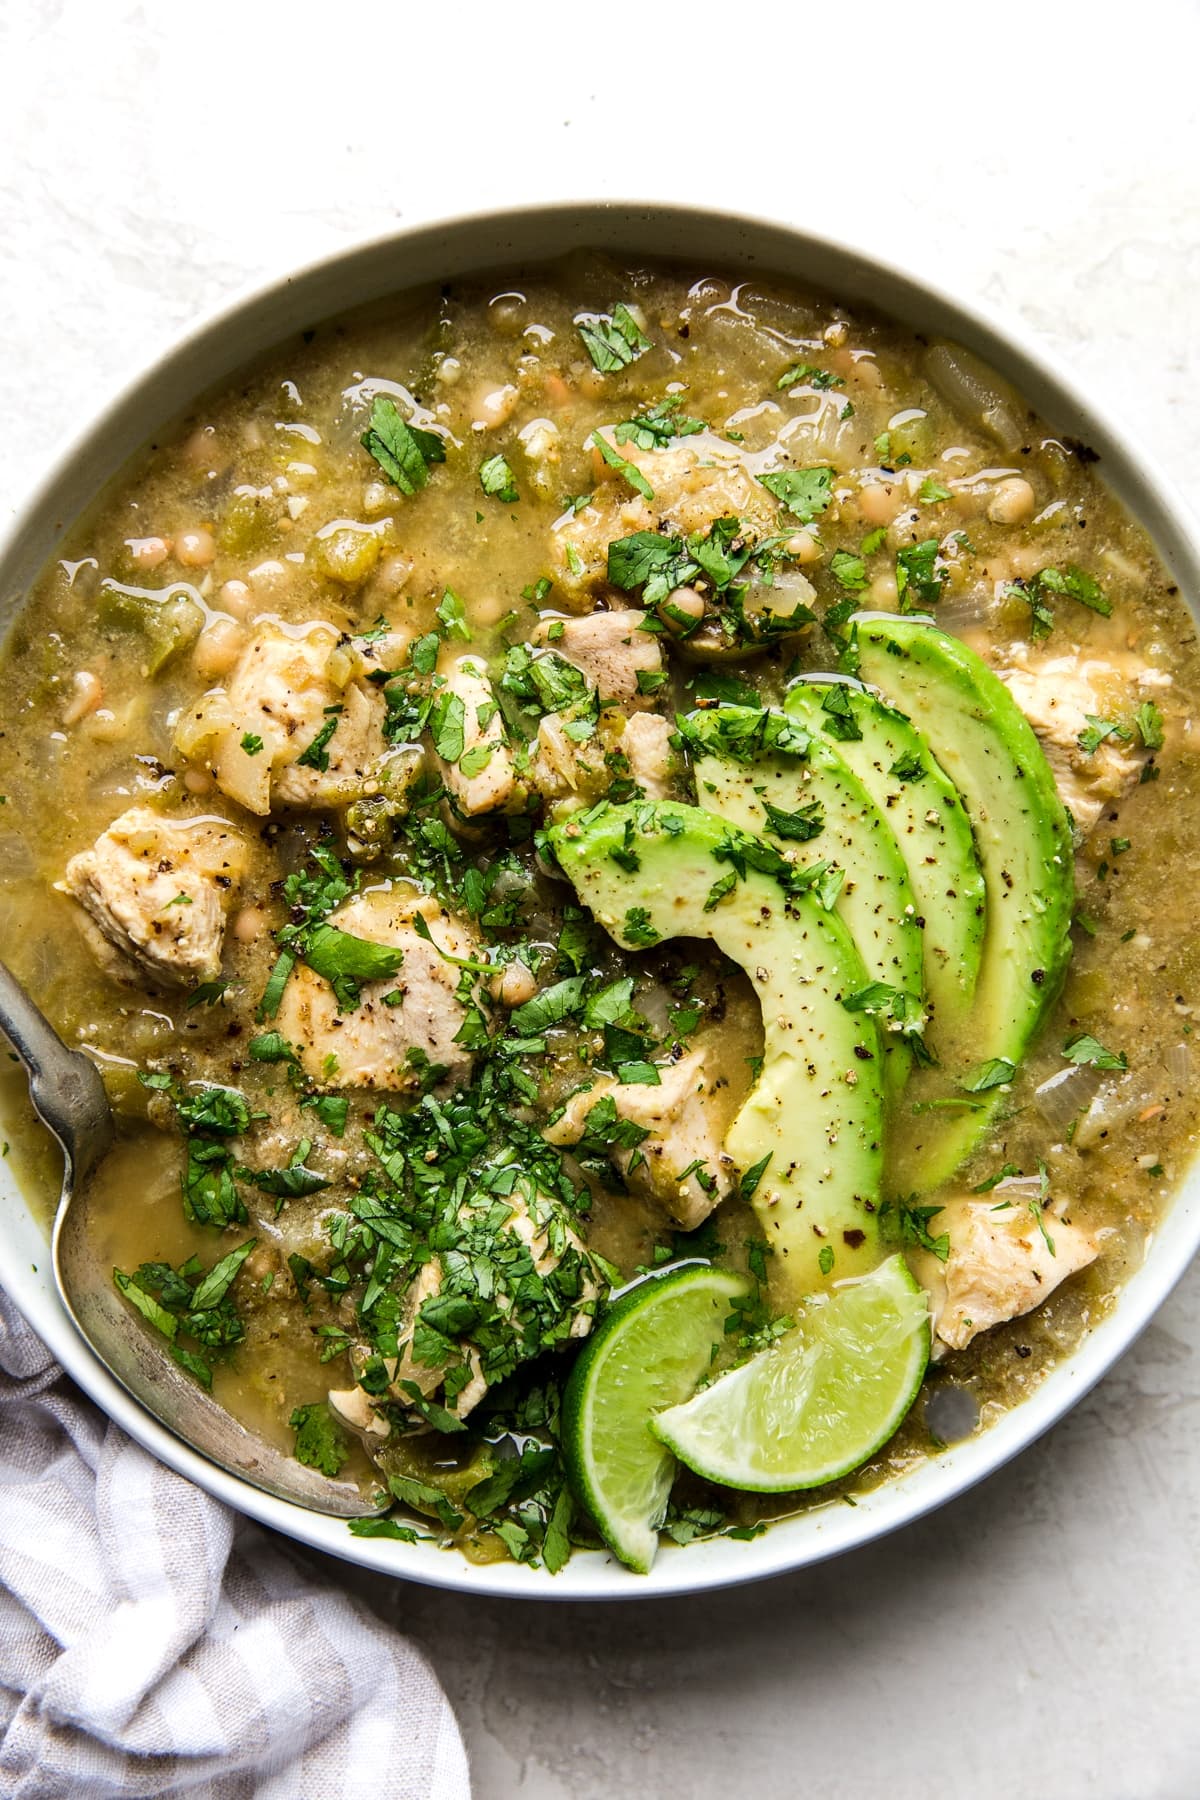 Green chicken chili verde soup in a bowl with avocado, lime and cilantro